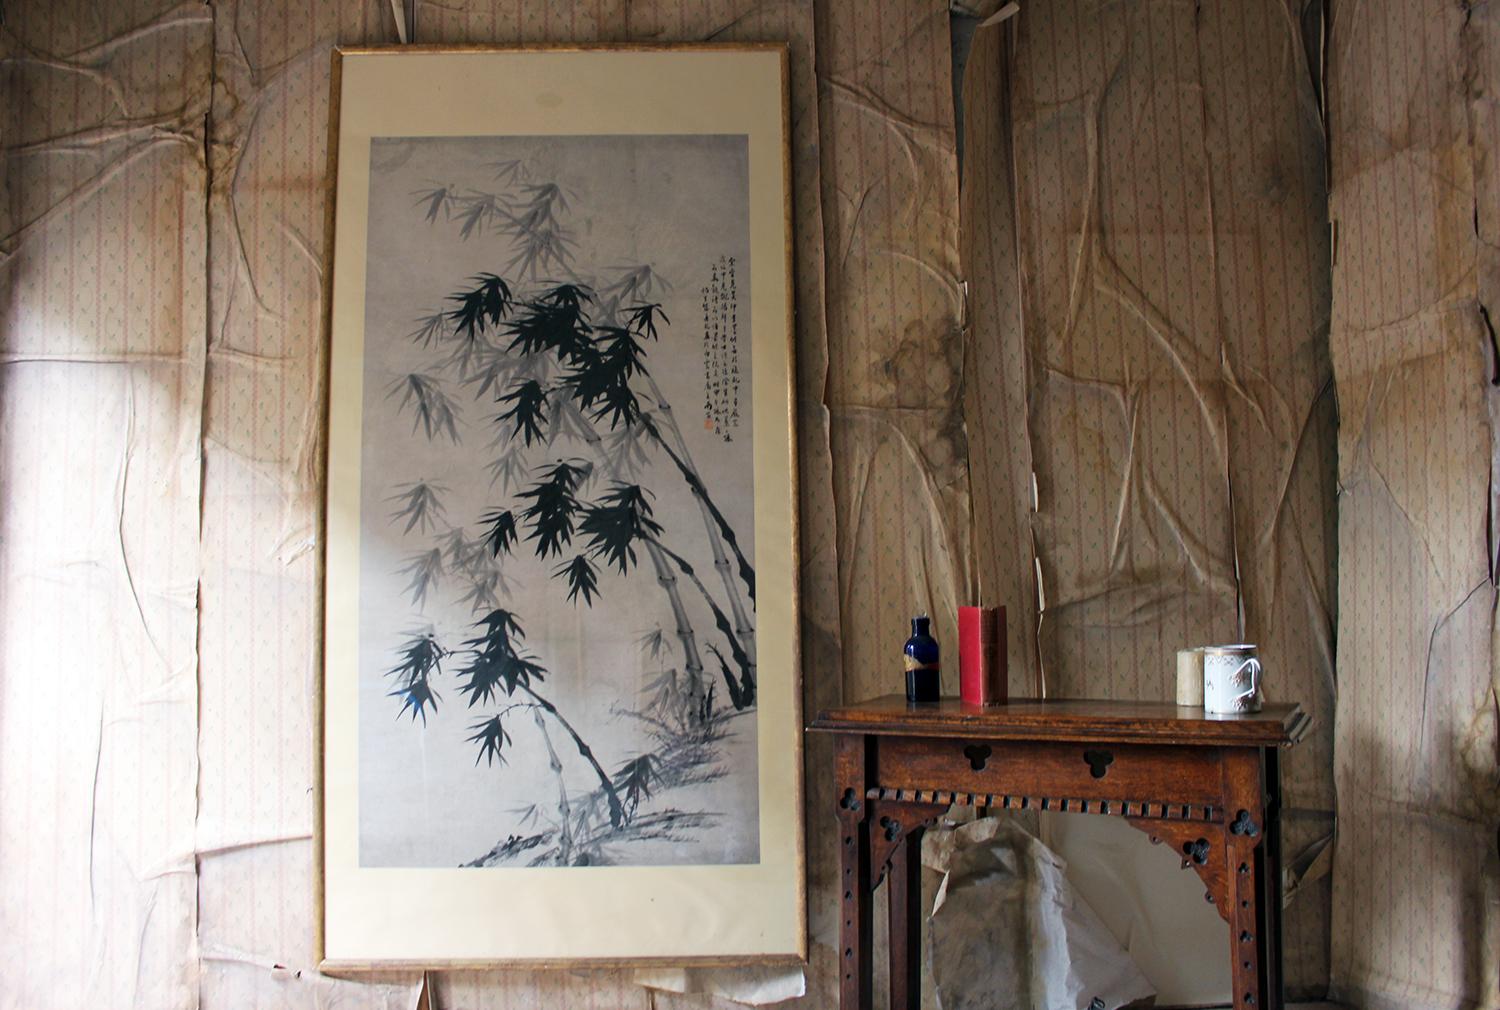 After 董其昌 Dong Qichang, Very Large Chinese Ink Painting of Bamboo, circa 1920-40 13